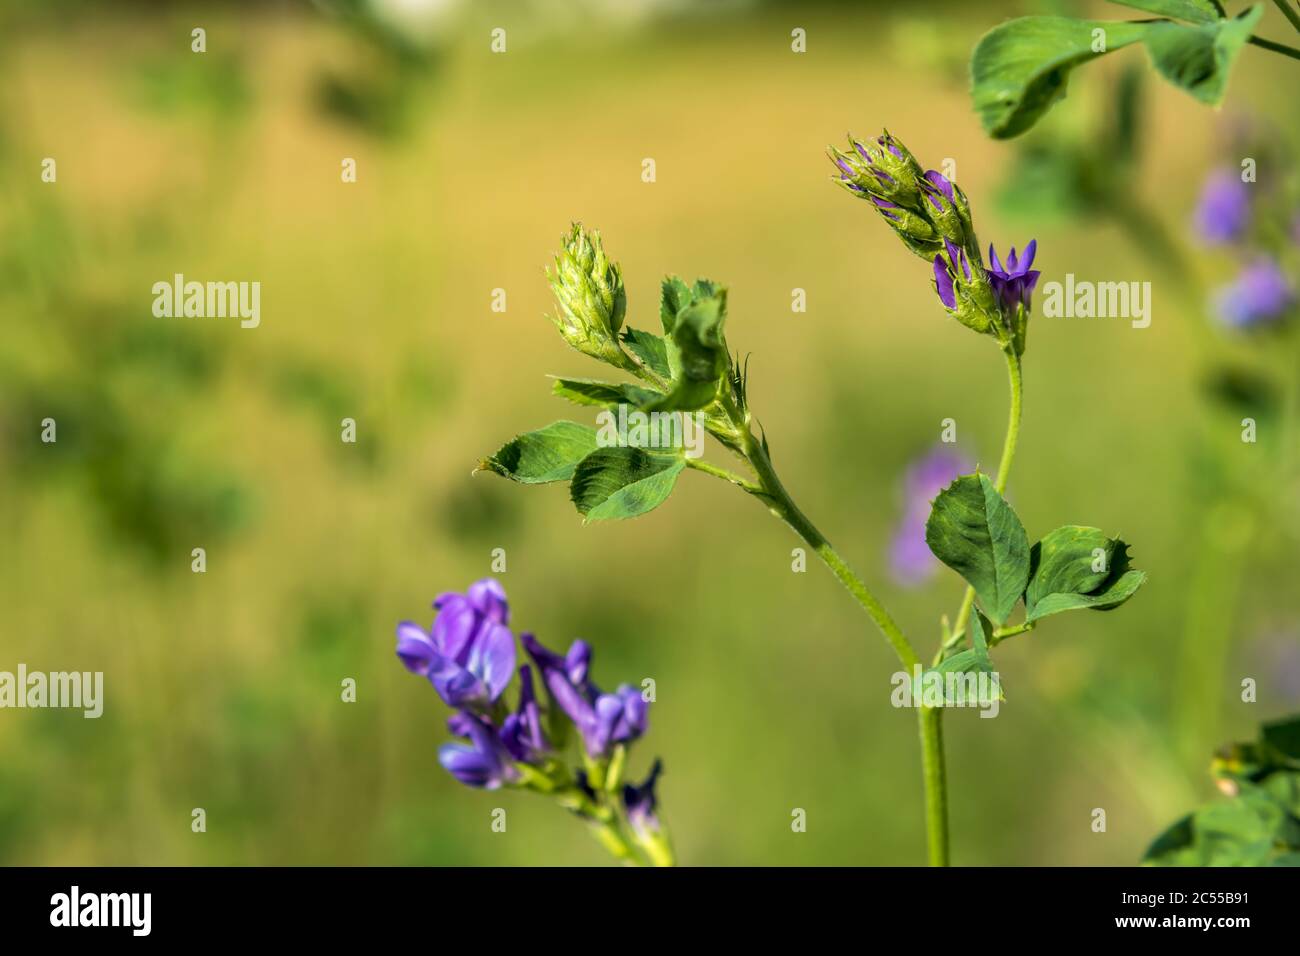 Medicago sativa or Alfalfa or Lucerne a perennial flowering plant in the legume family Fabaceae Stock Photo